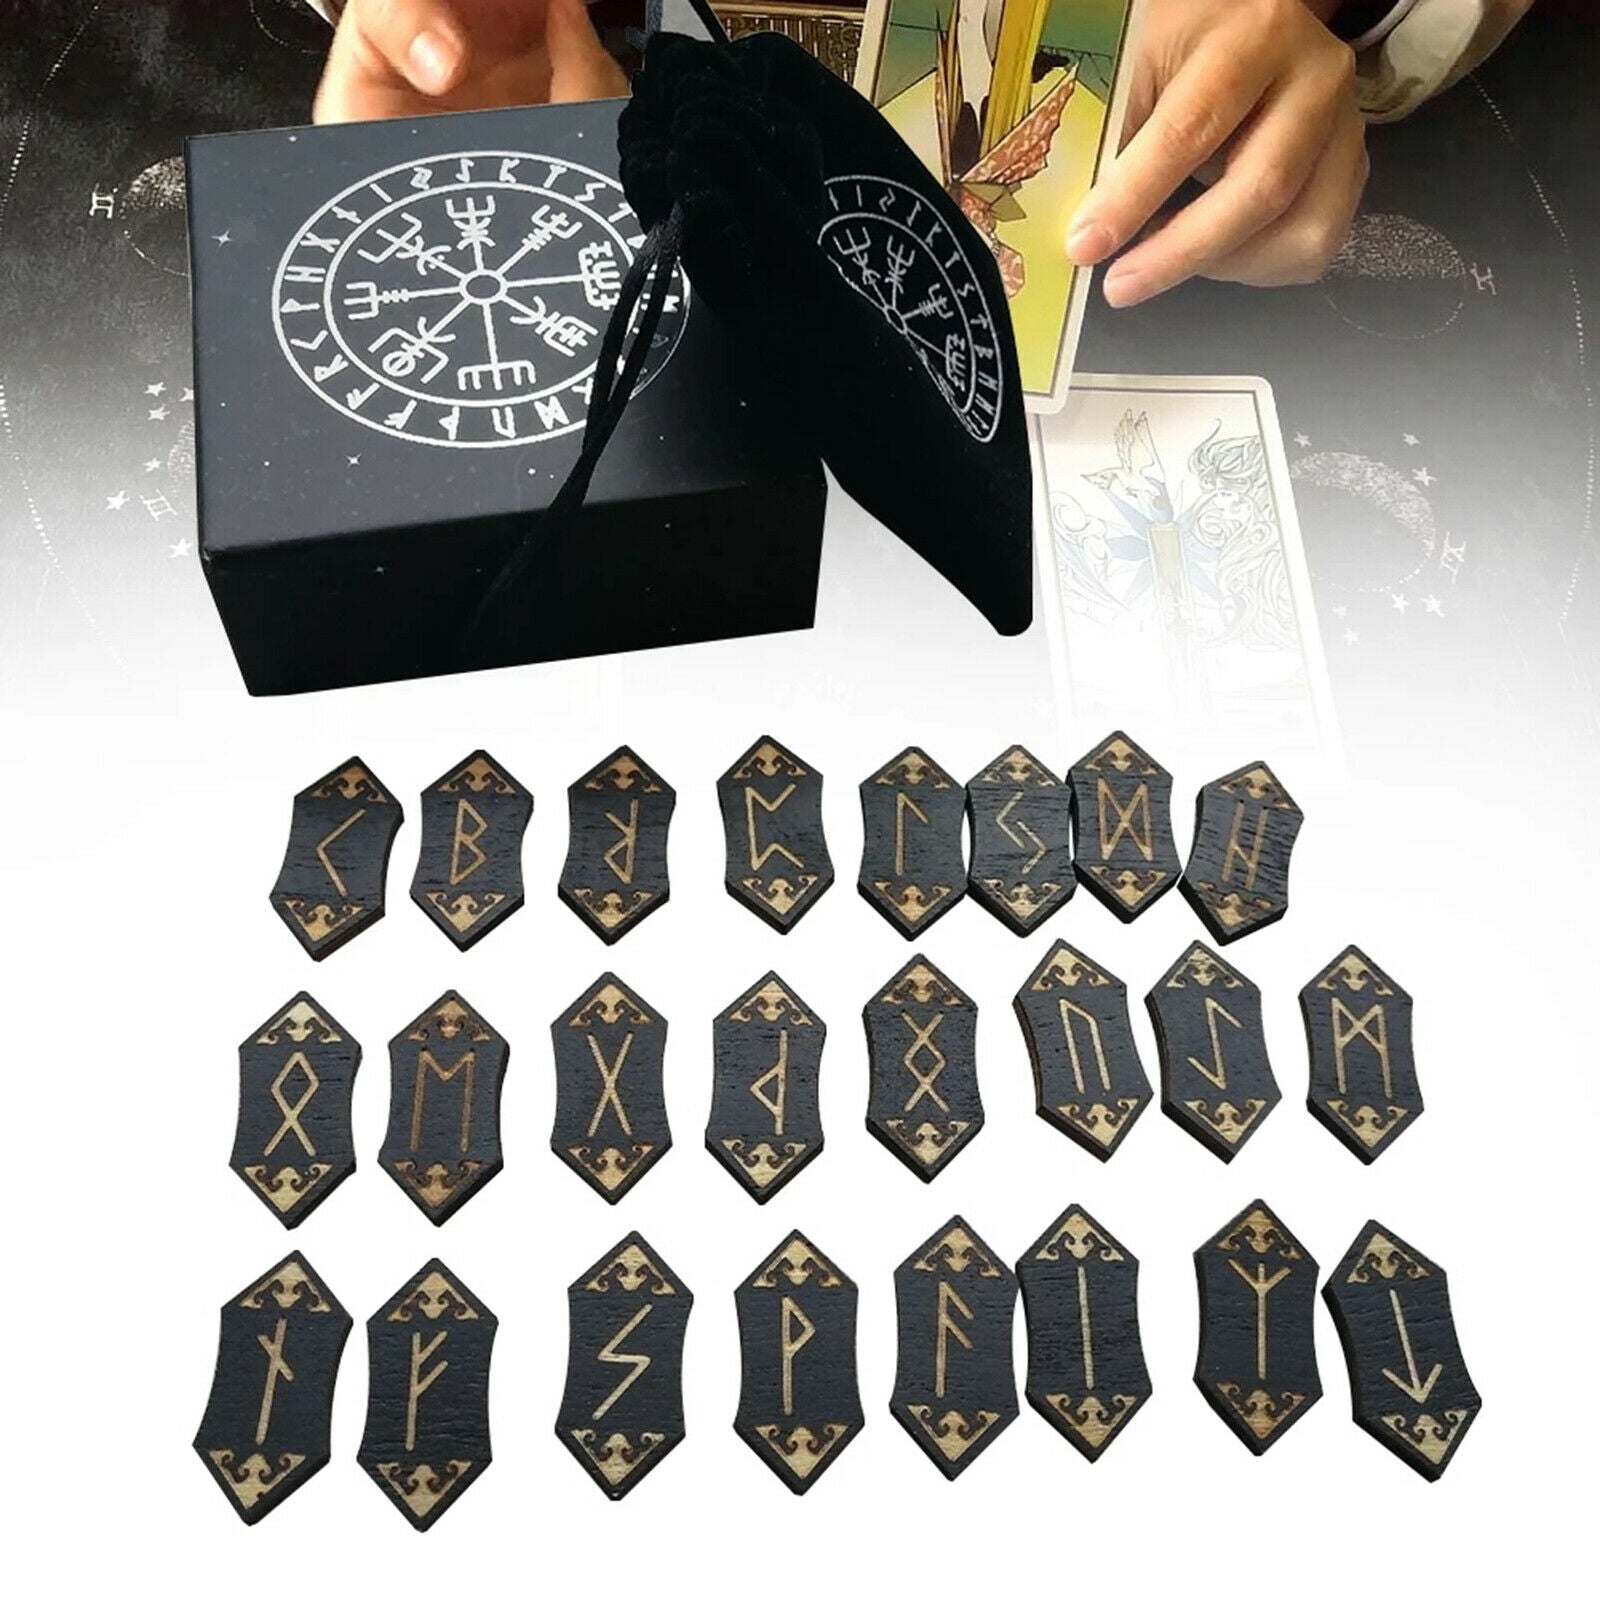 Rune Stones Card Set Nordic with Bag Props Home Toys The product card set is